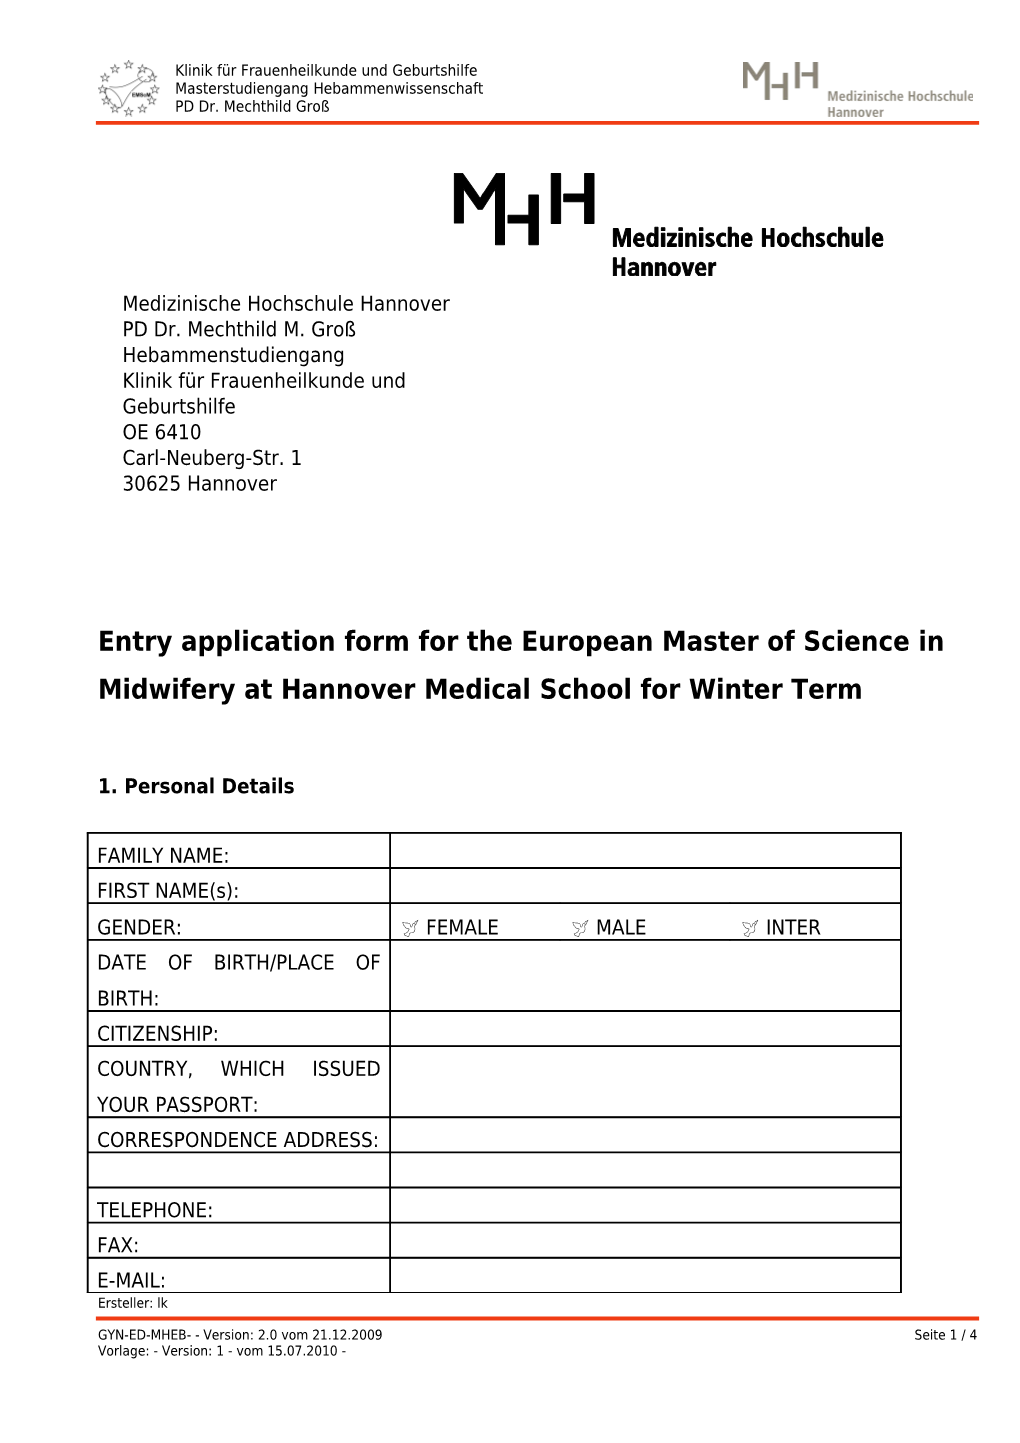 Entry Application Form for the European Master of Science In